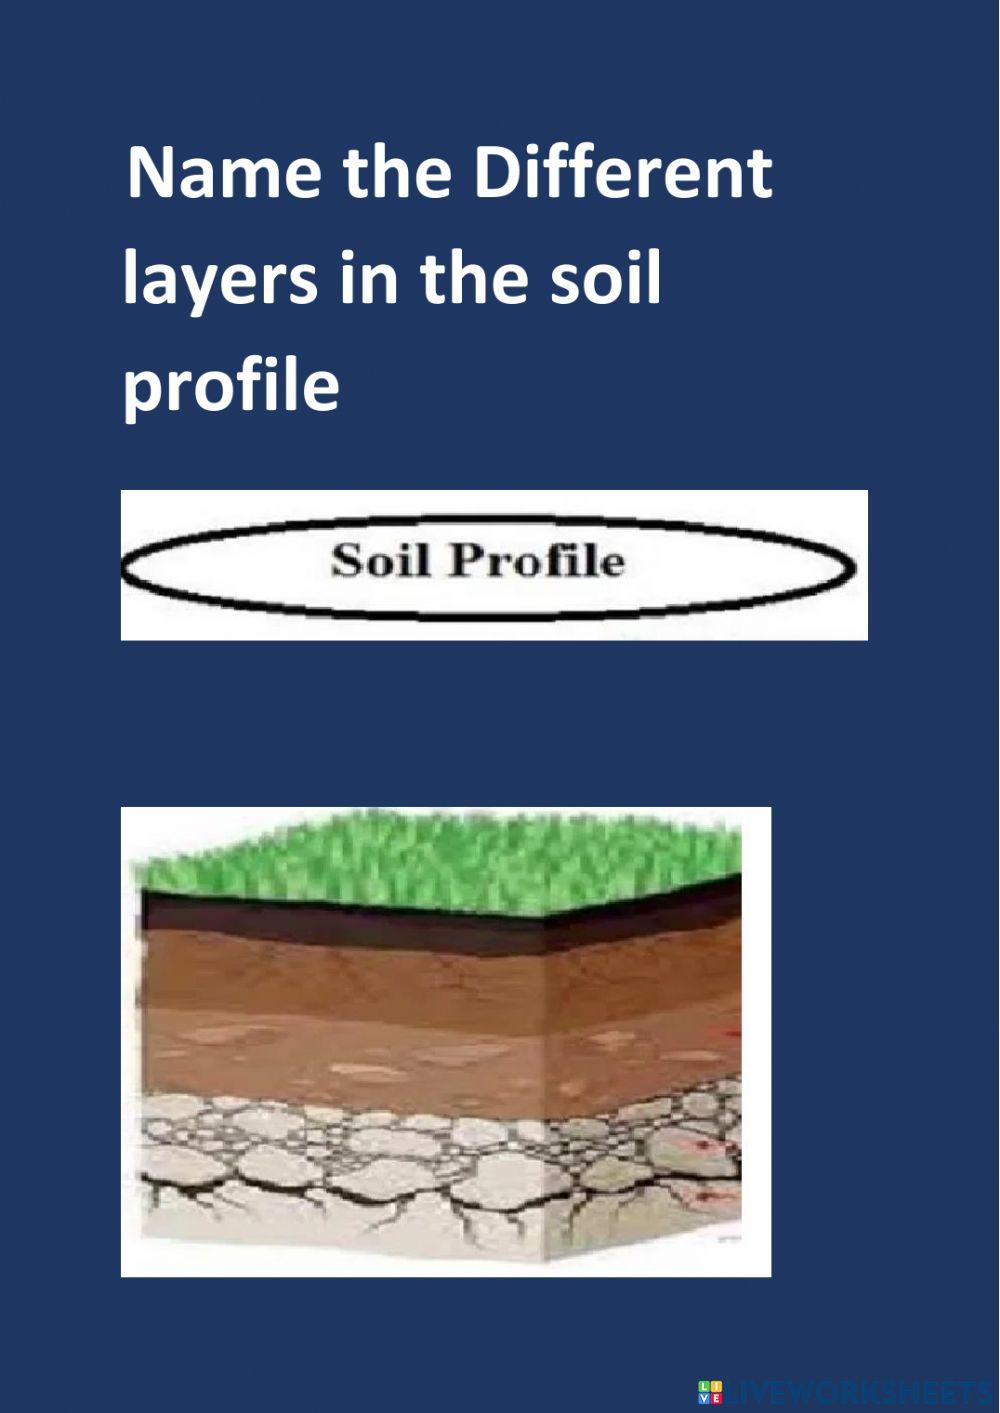 Layers of soil